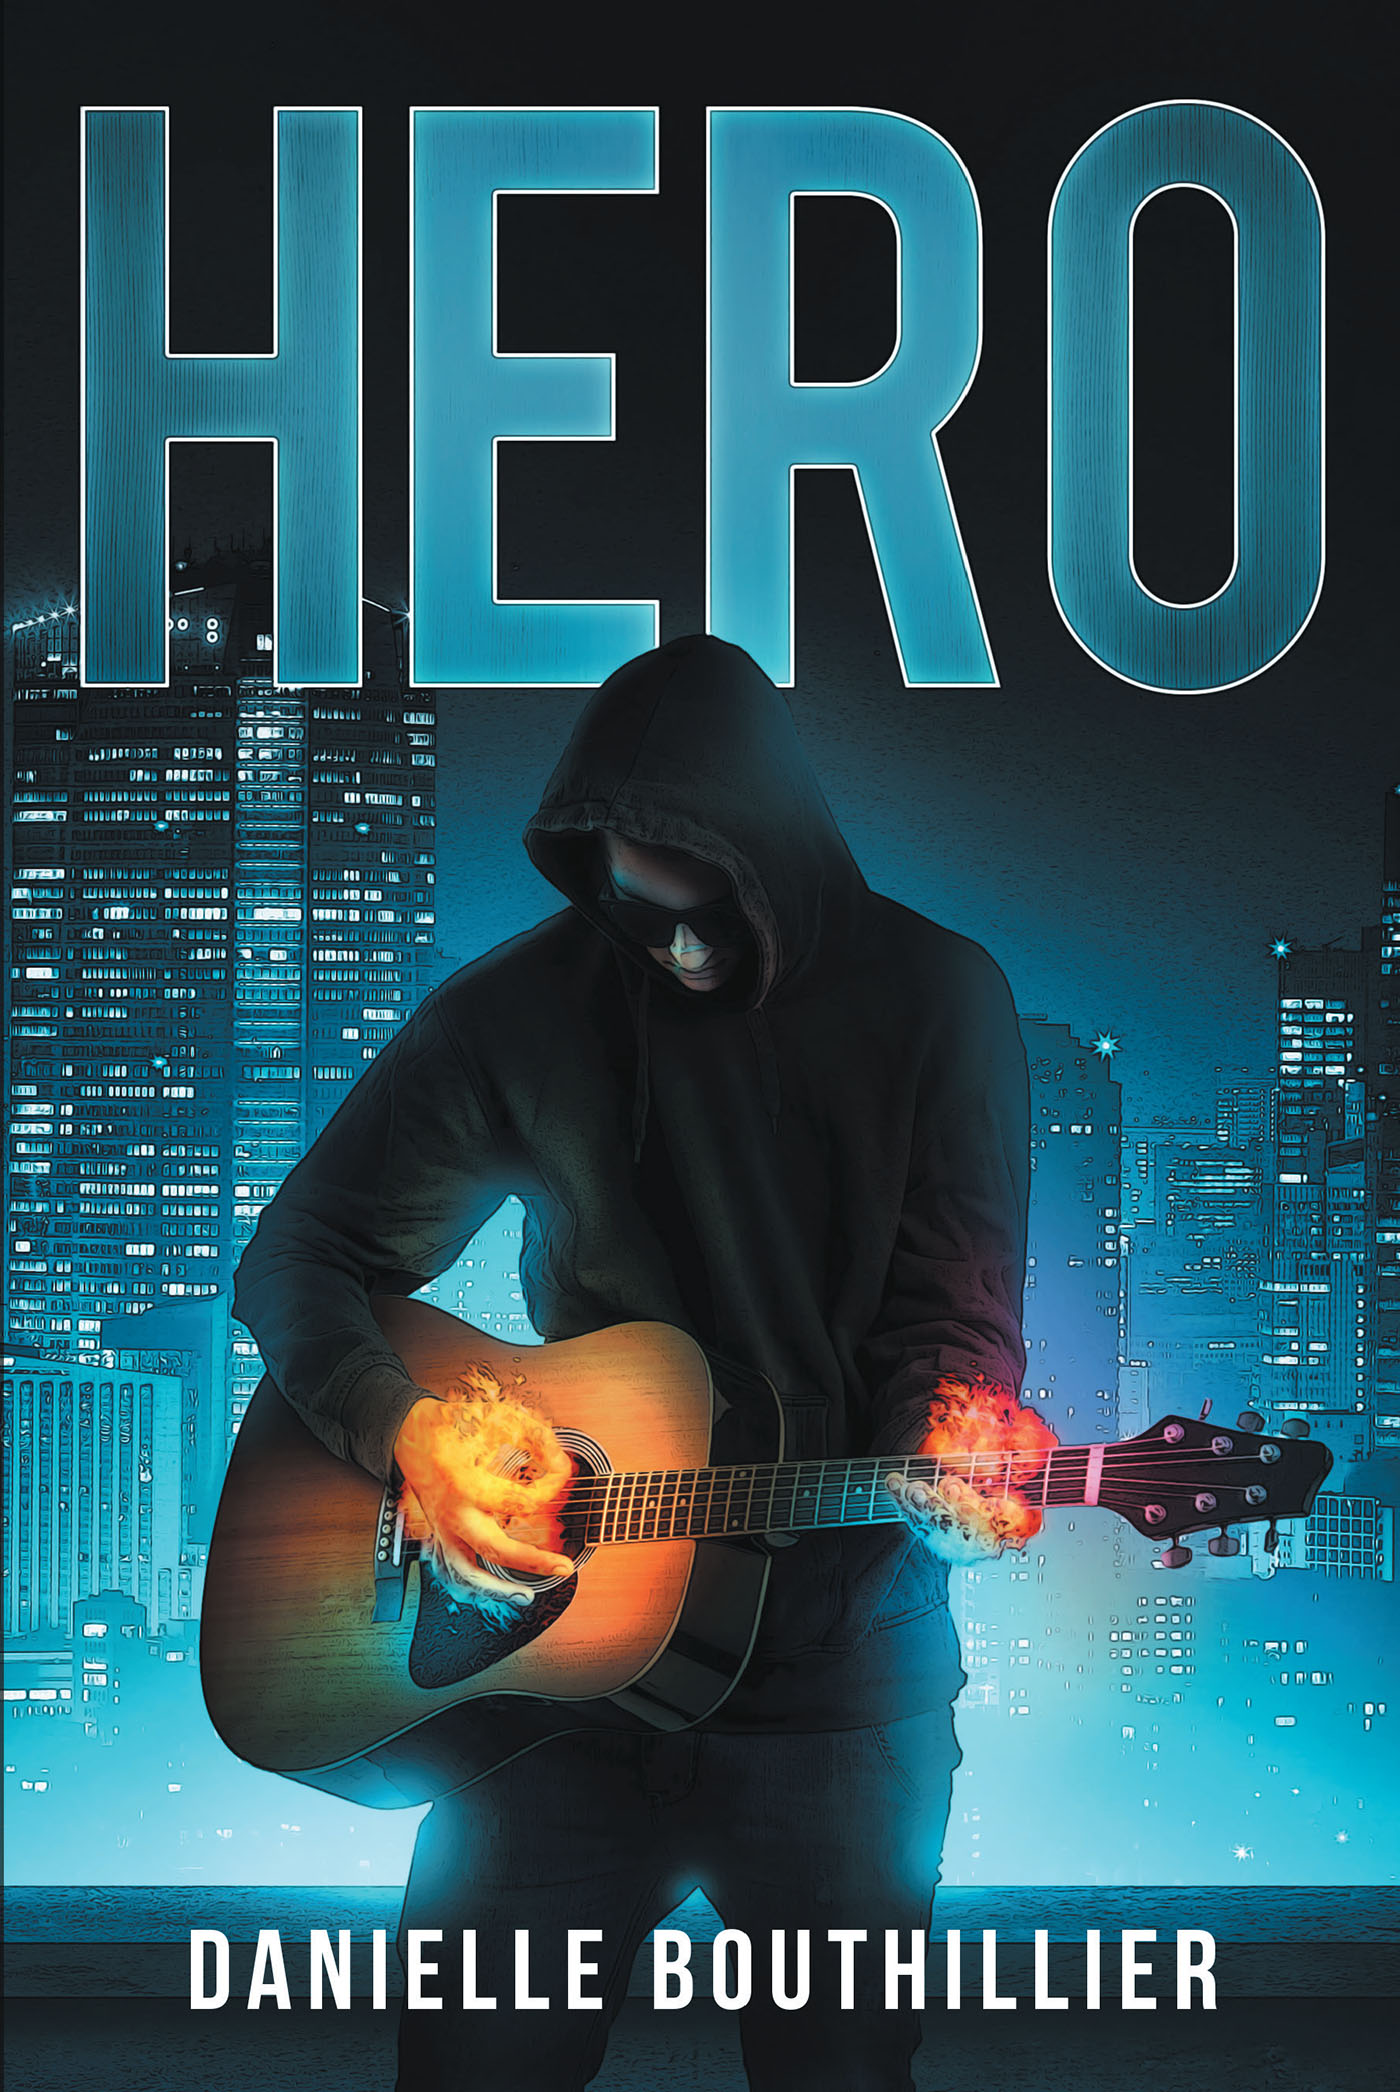 Author Danielle Bouthillier’s New Book, "Hero," Follows a Superhero Who Struggles to Keep Her Secret After Revealing Her Identity to the Son of Her Arch Nemesis